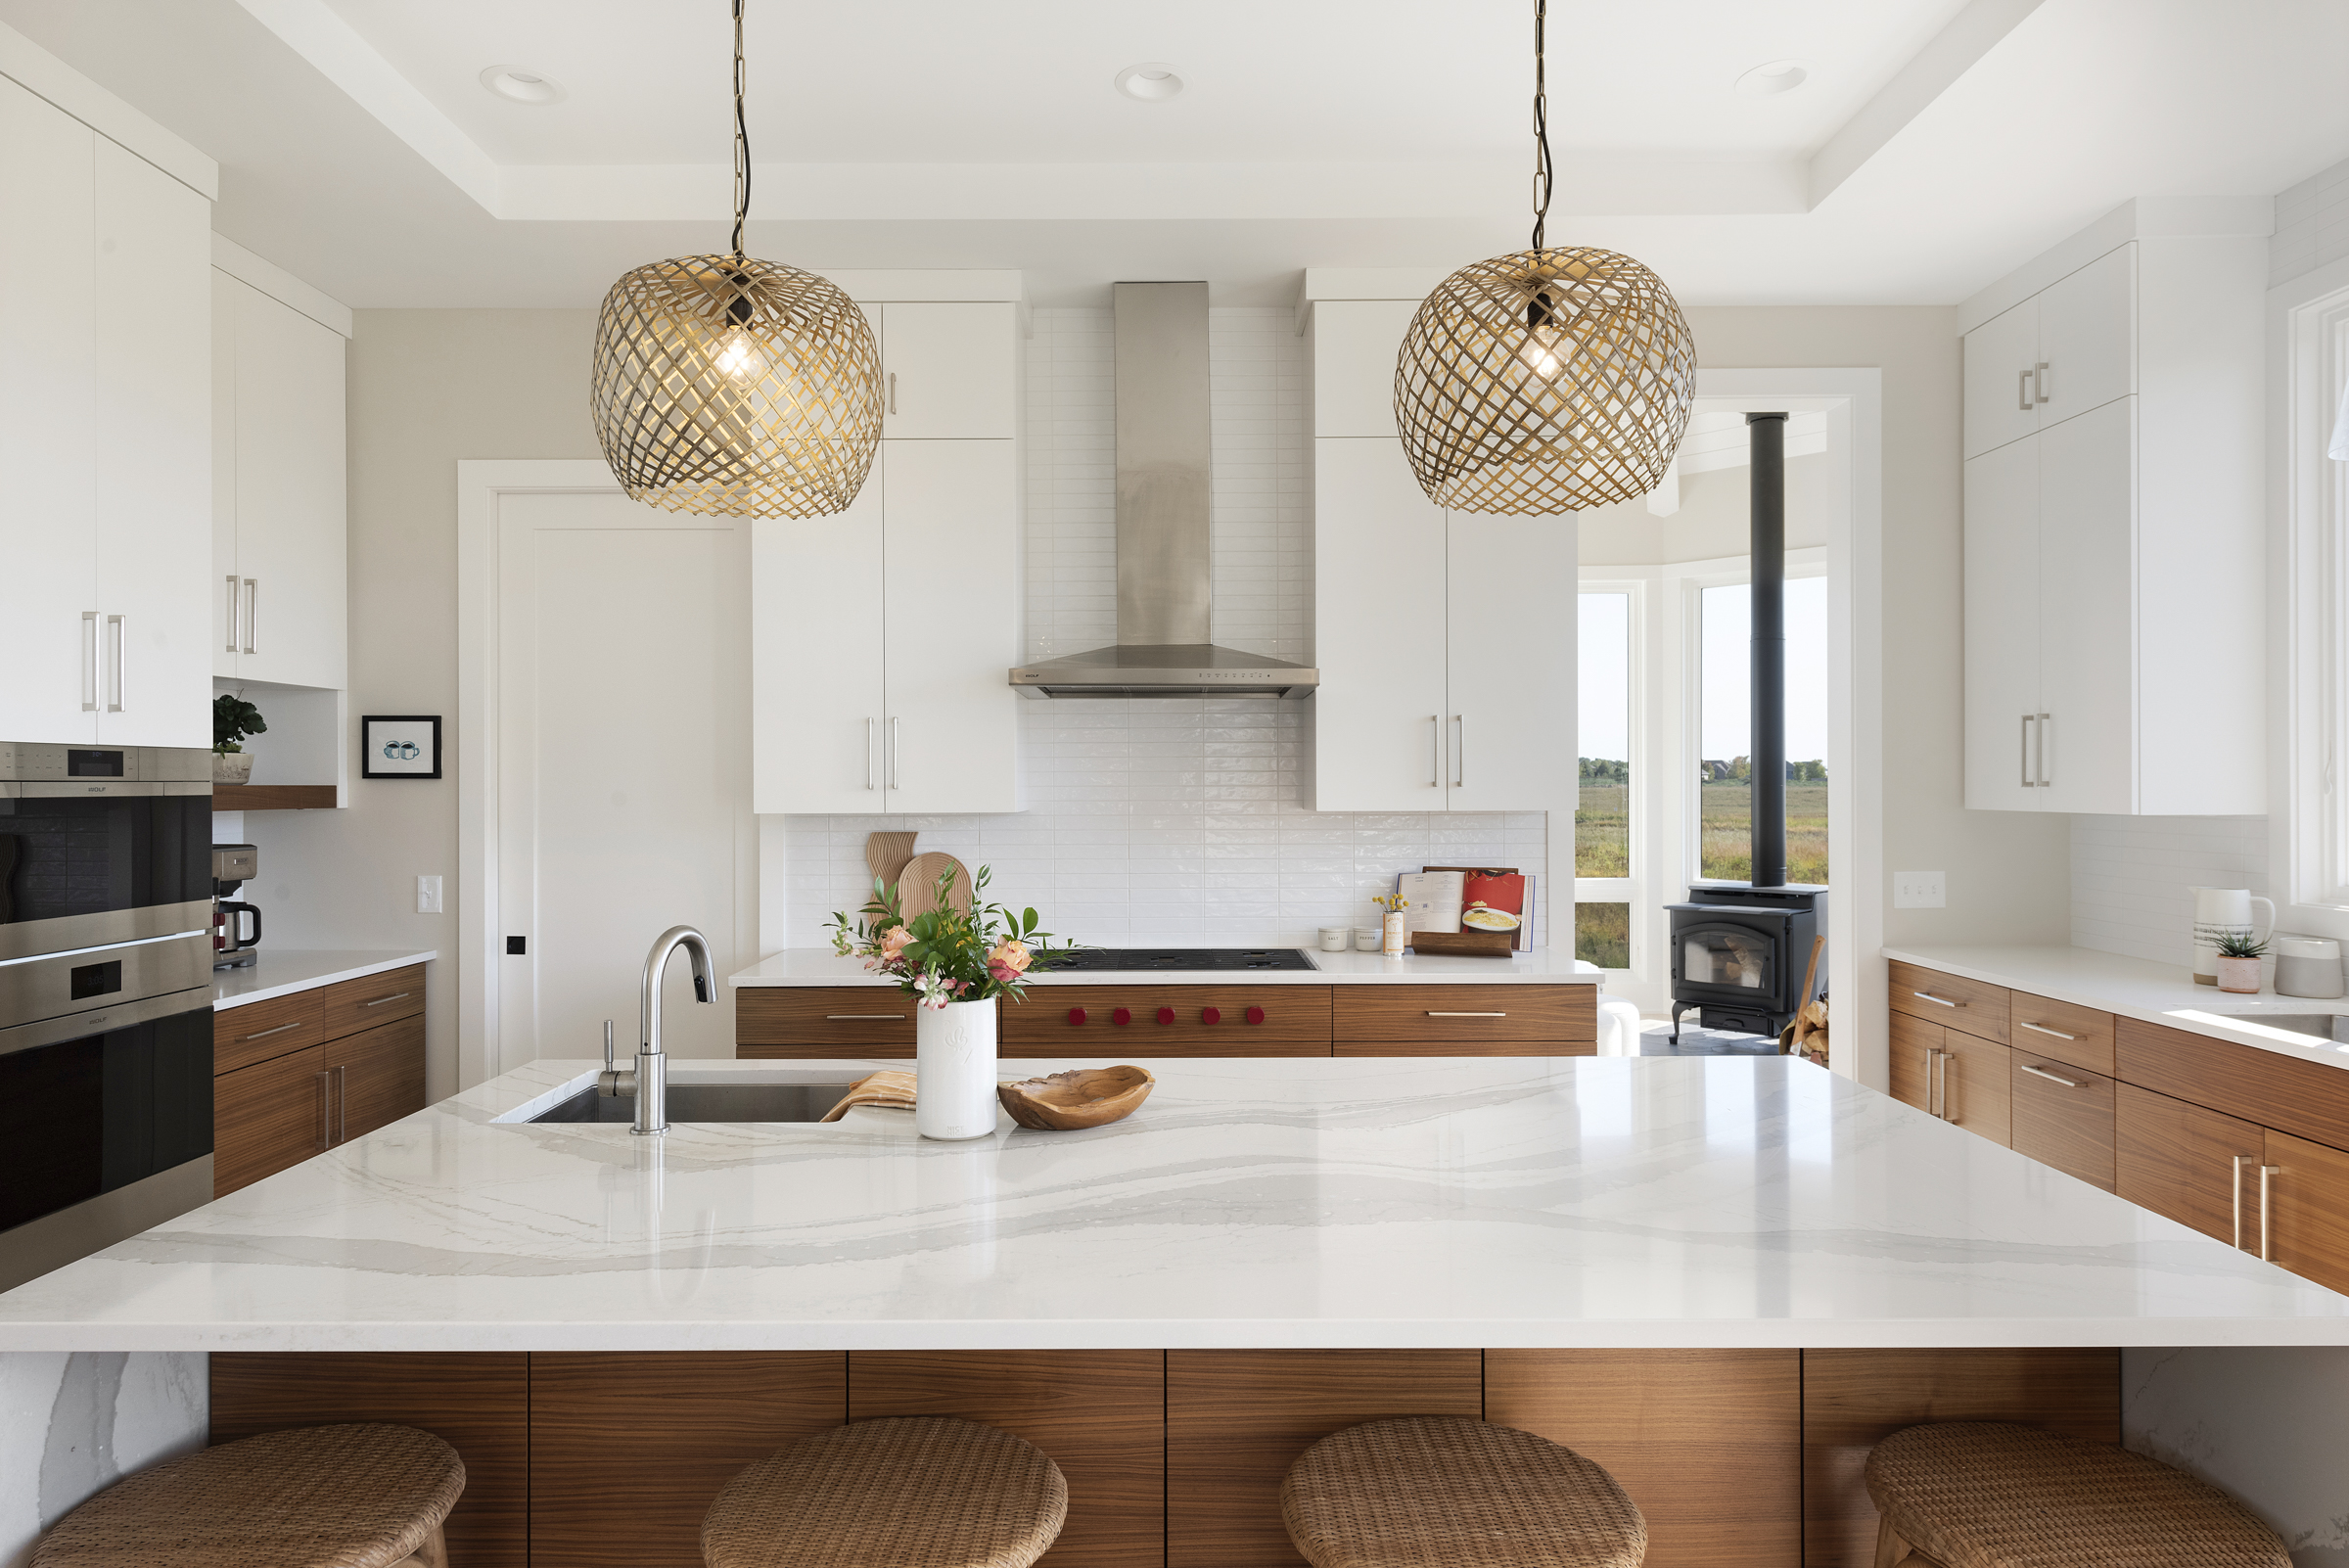 A prairie transitional custom home with a modern kitchen featuring a marble island and stools.